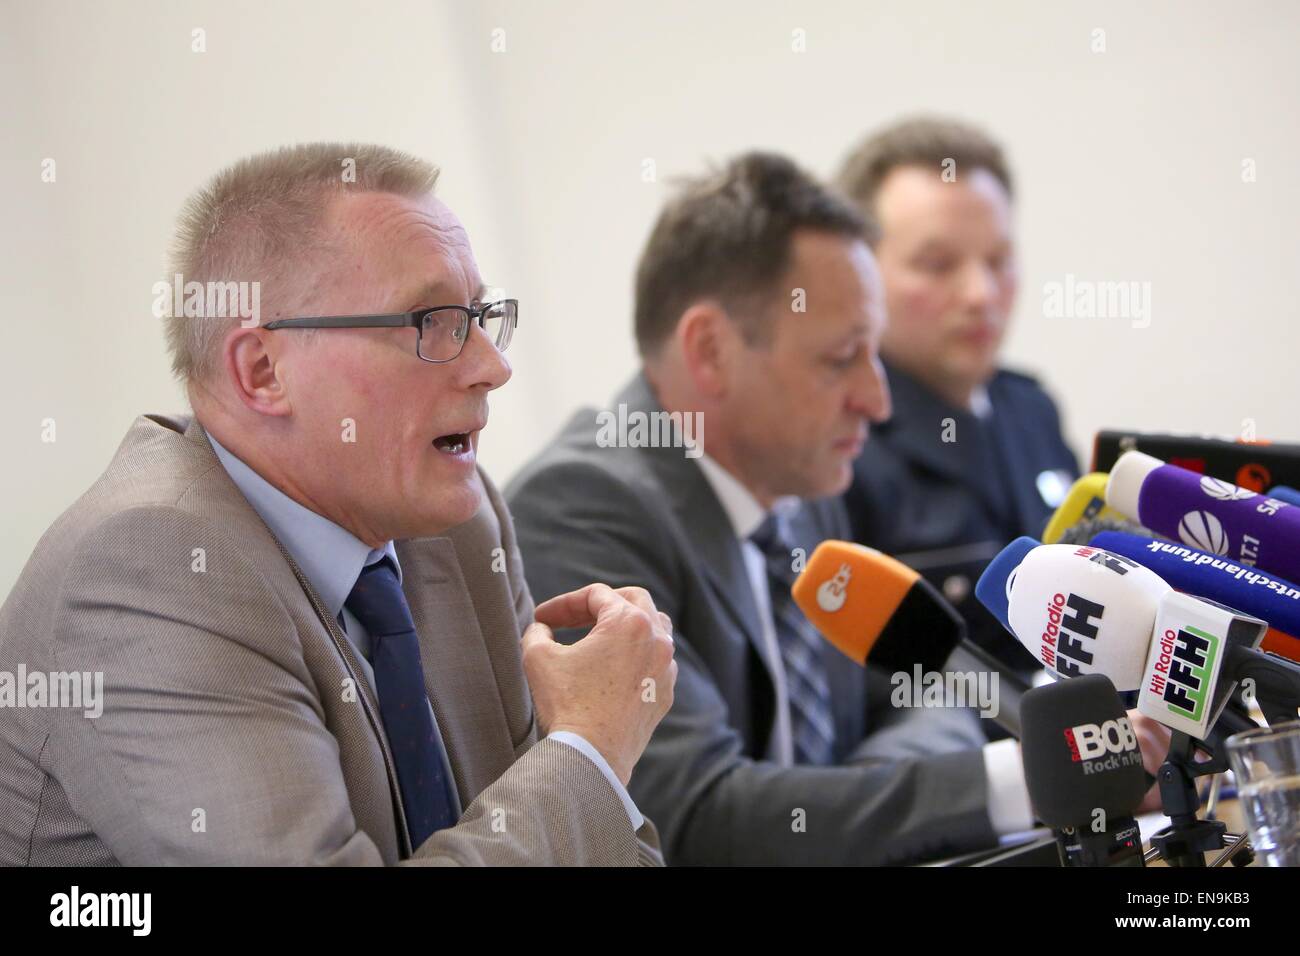 Wiesbaden, Germany. 30th Apr, 2015. Albrecht Schreiber (L-R), chief prosecutor of Frankfurt, Stefan Mueller, police president of the police headquarters Western Hesse, and spokesperson Markus Hoffmann attend a press conference at the police headquarters Western Hesse in Wiesbaden, Germany, 30 April 2015. According to the state's Interior ministry, the Hessian police prevented a terrorist attack. PHOTO: FREDRIK VON ERICHSEN/dpa/Alamy Live News Stock Photo